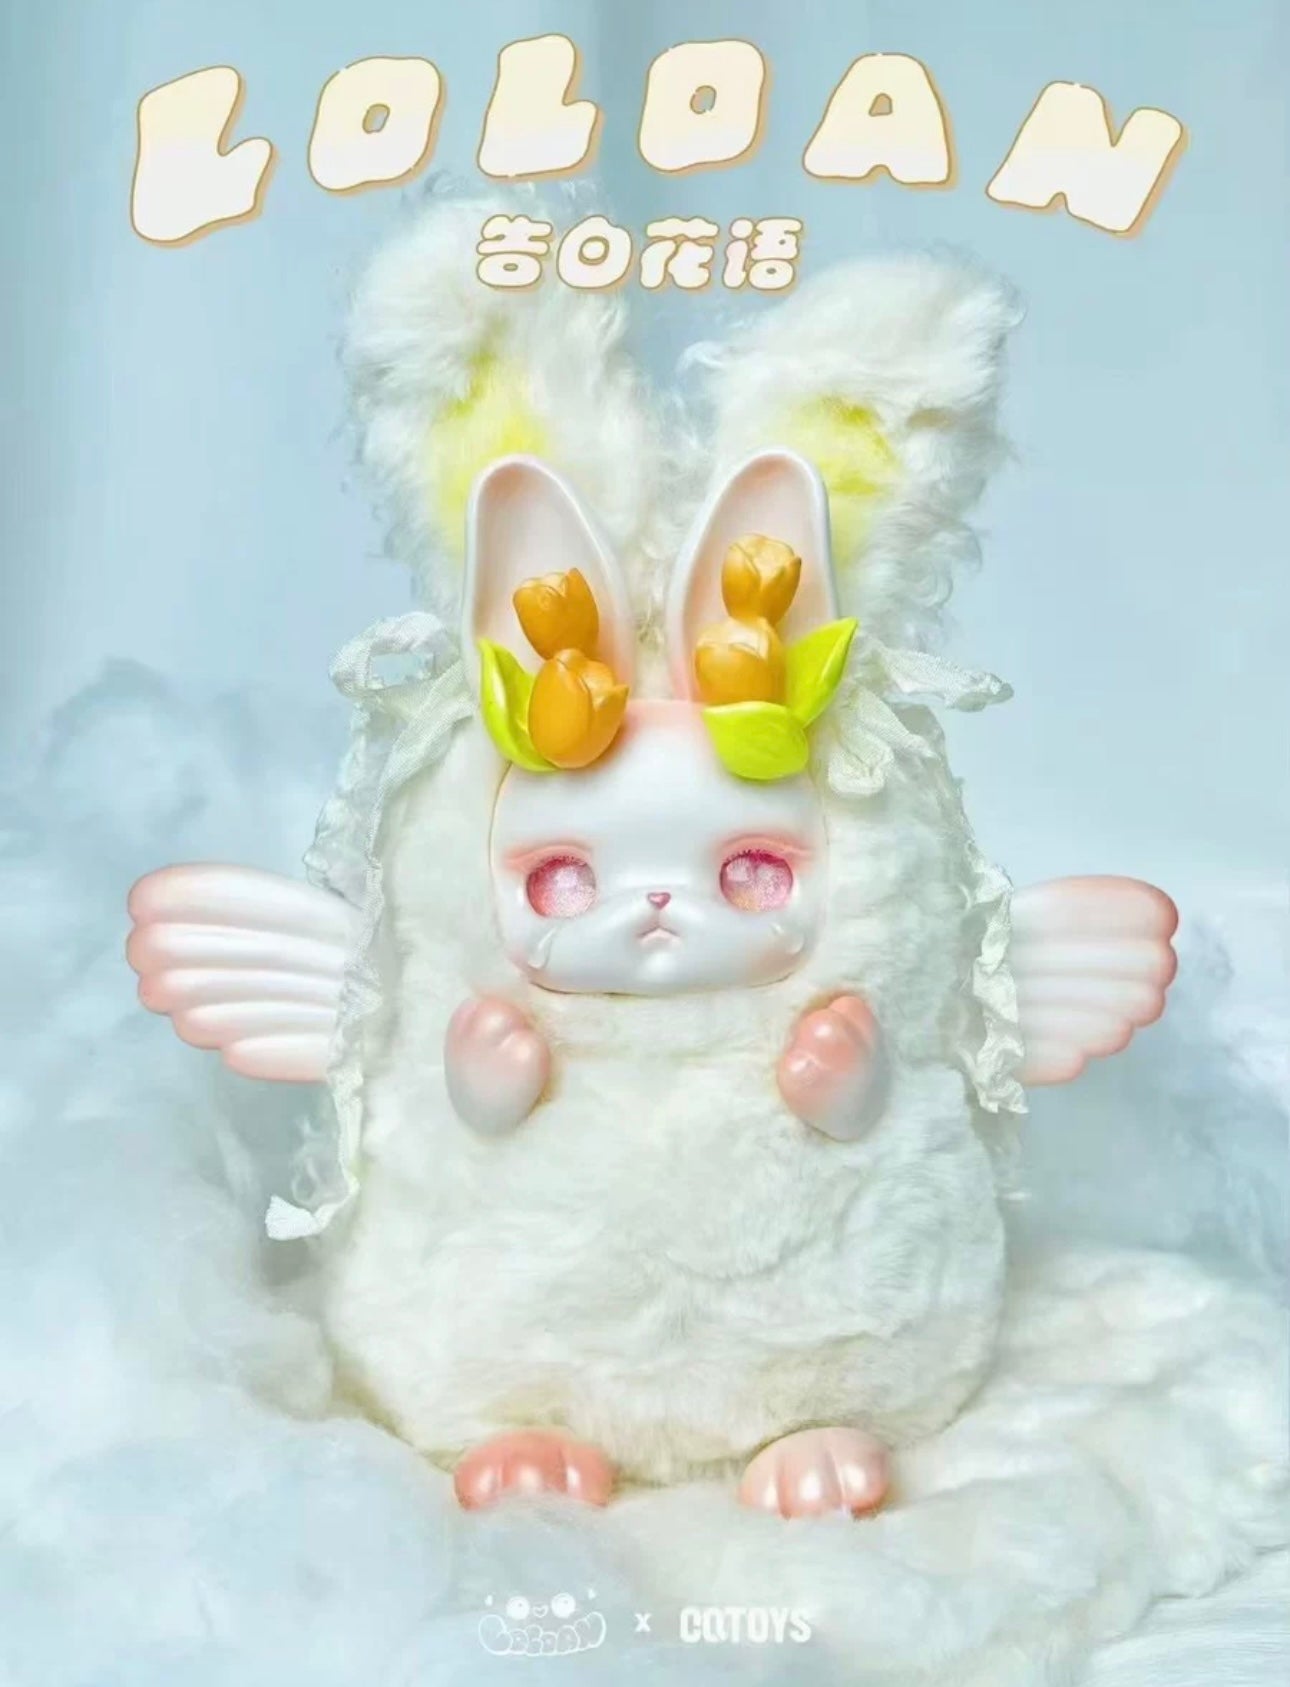 Fantasy Creatures Confession Flowers | LOLOAN Rabbit - Giant Plush Doll Collectable Toys Mystery Blind Box